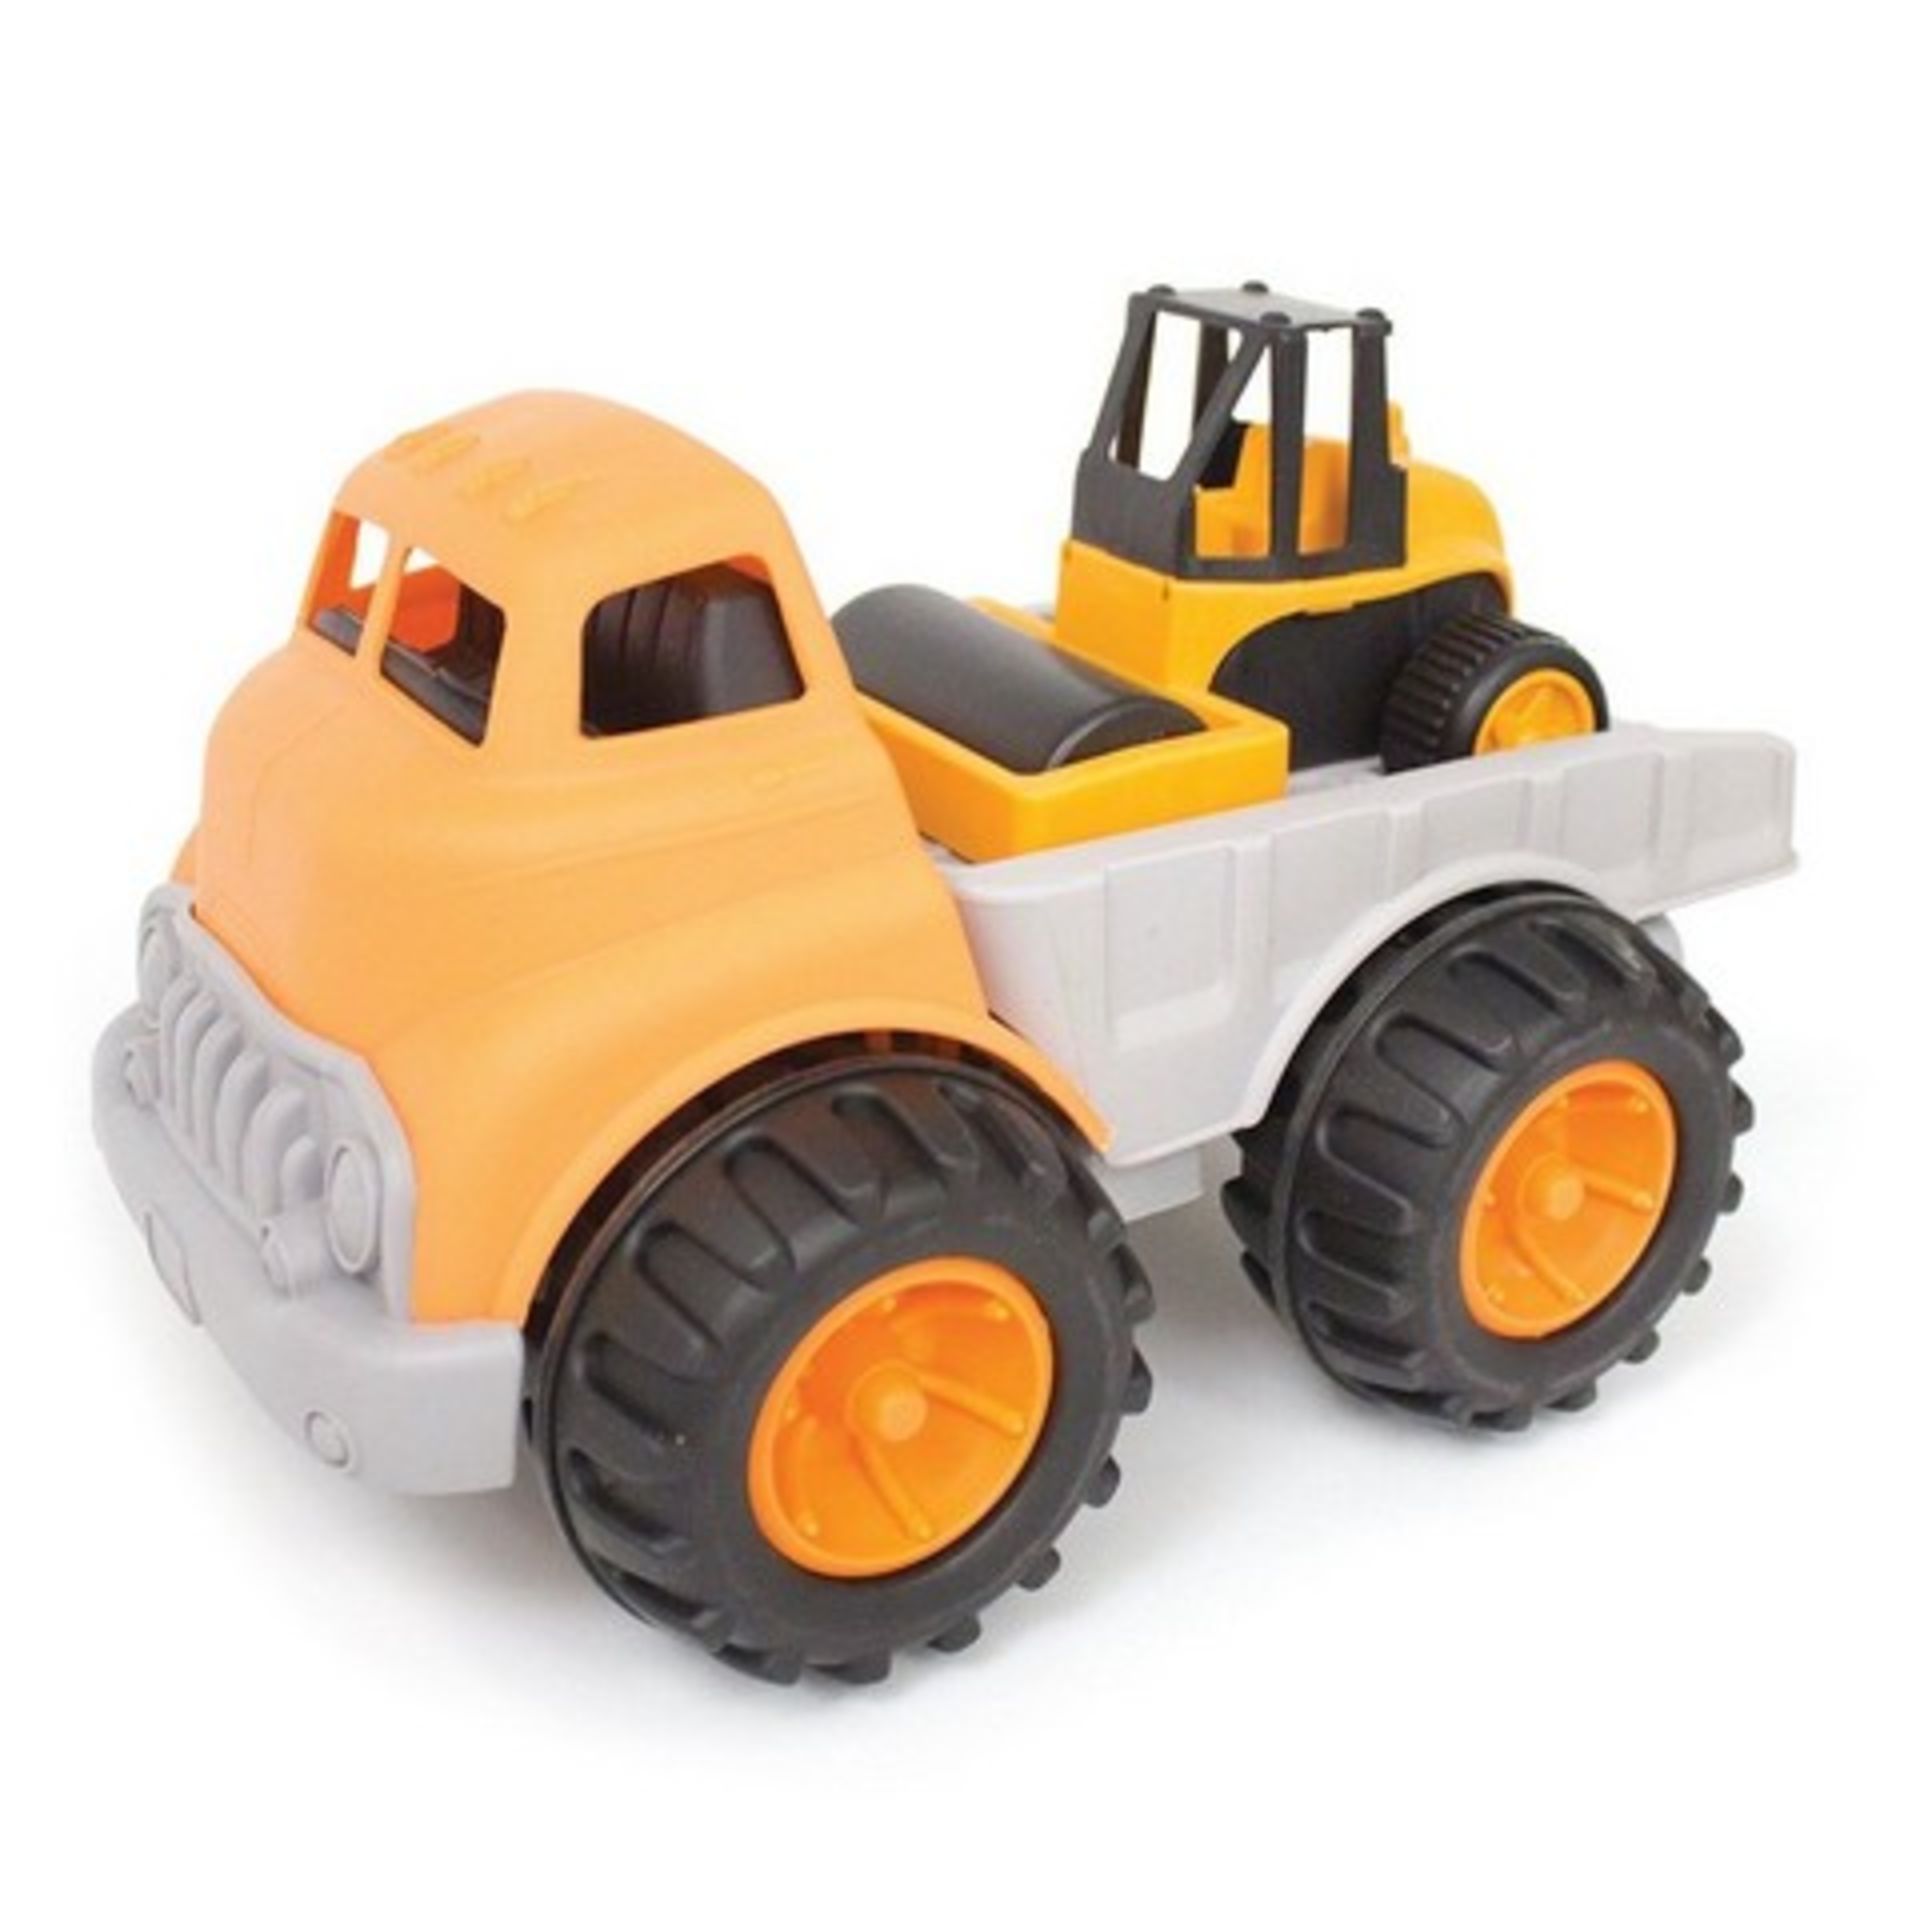 V Brand New Big Play Truck Construction Engineering Brigade Vehicle Set - Ideal For Sandpit Play (